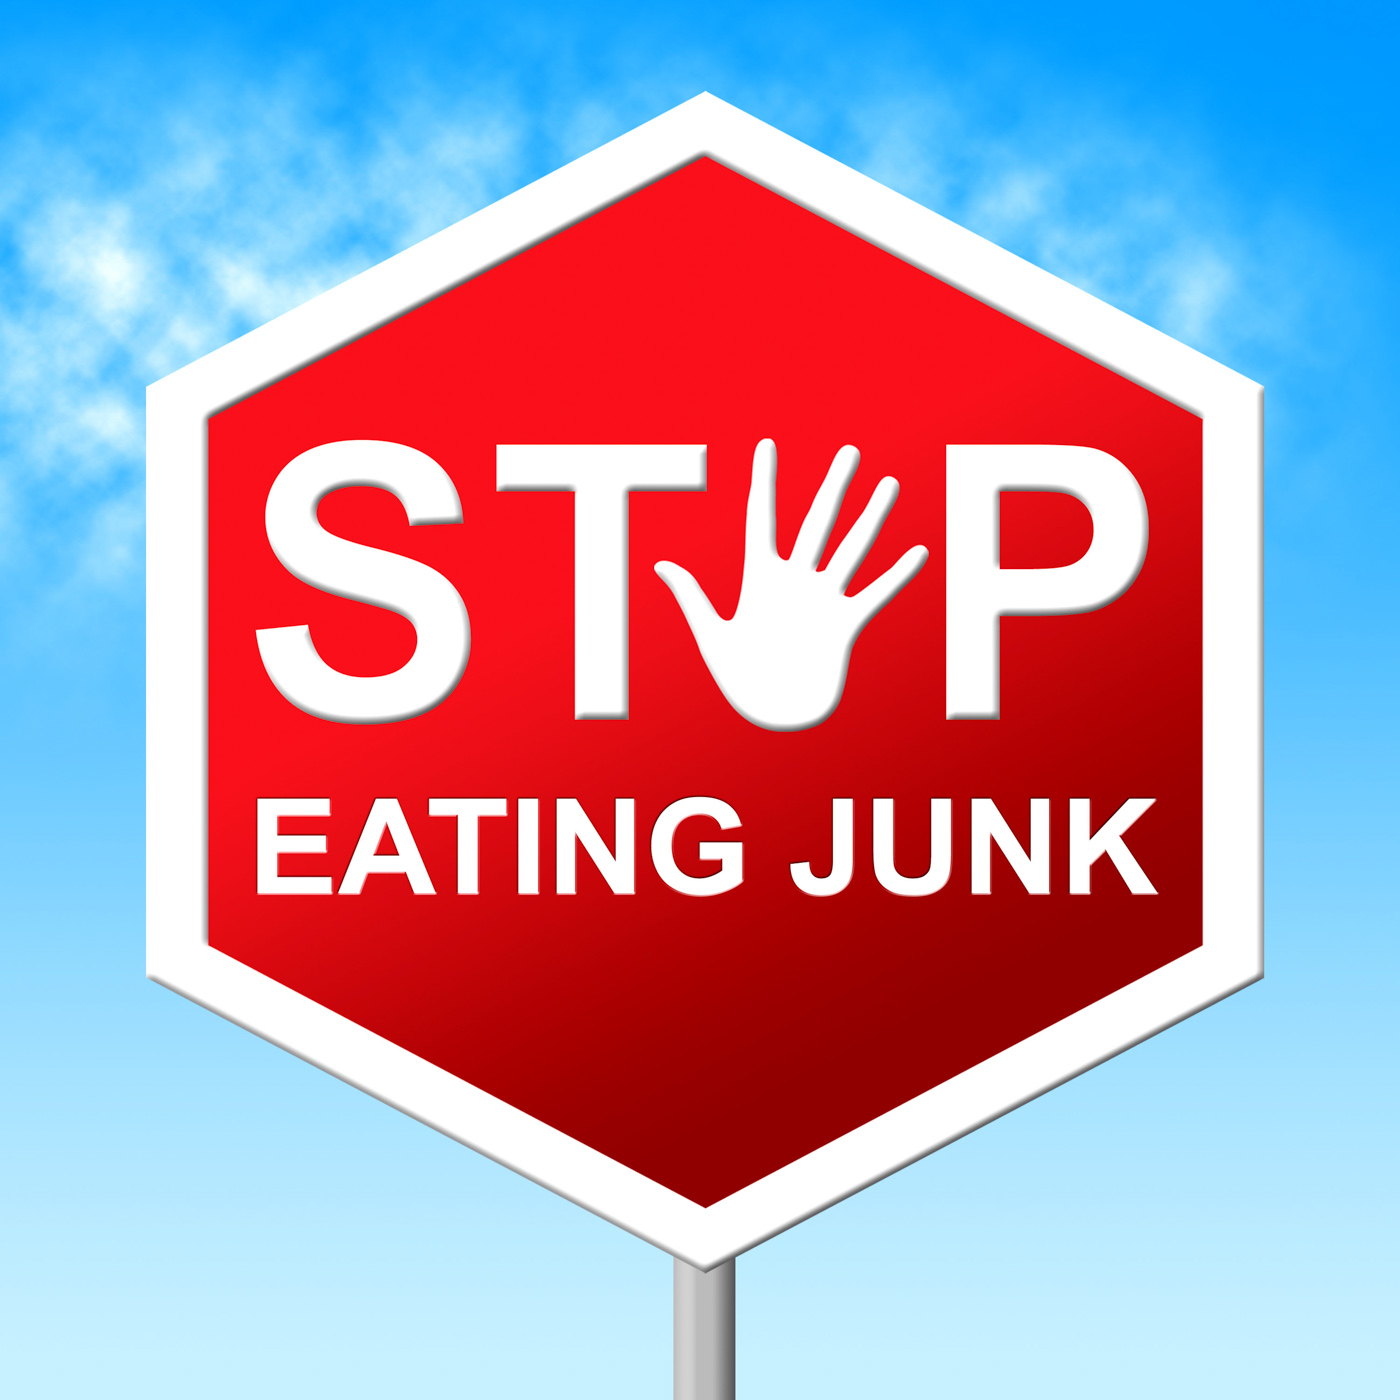 Stop eating junk indicates fast food and control photo